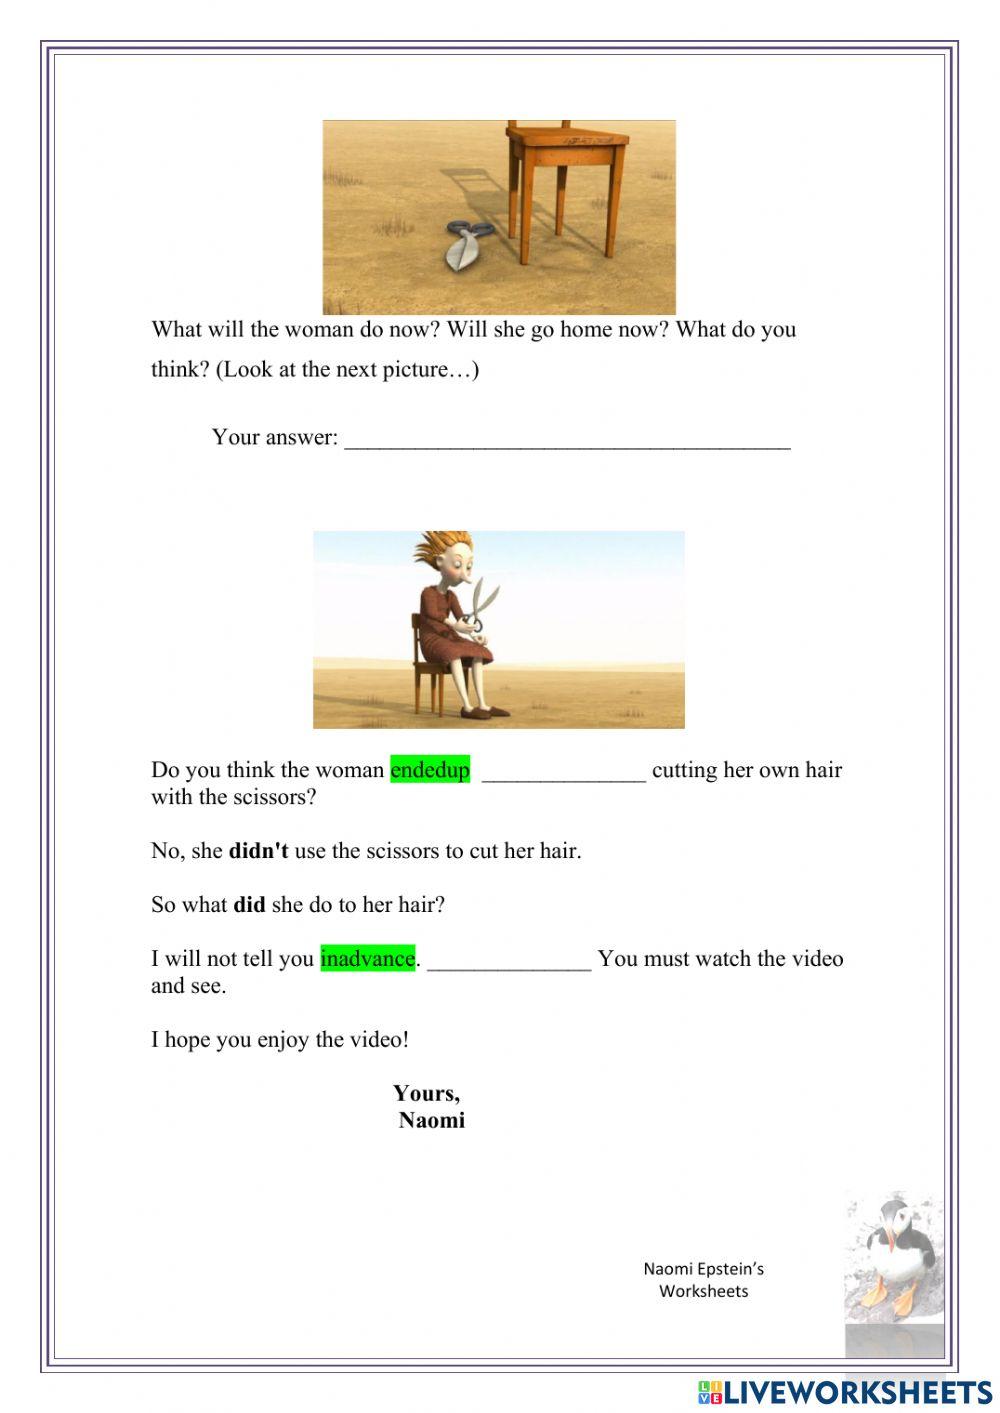 The Vocabulary 400 Project - Chunks in context